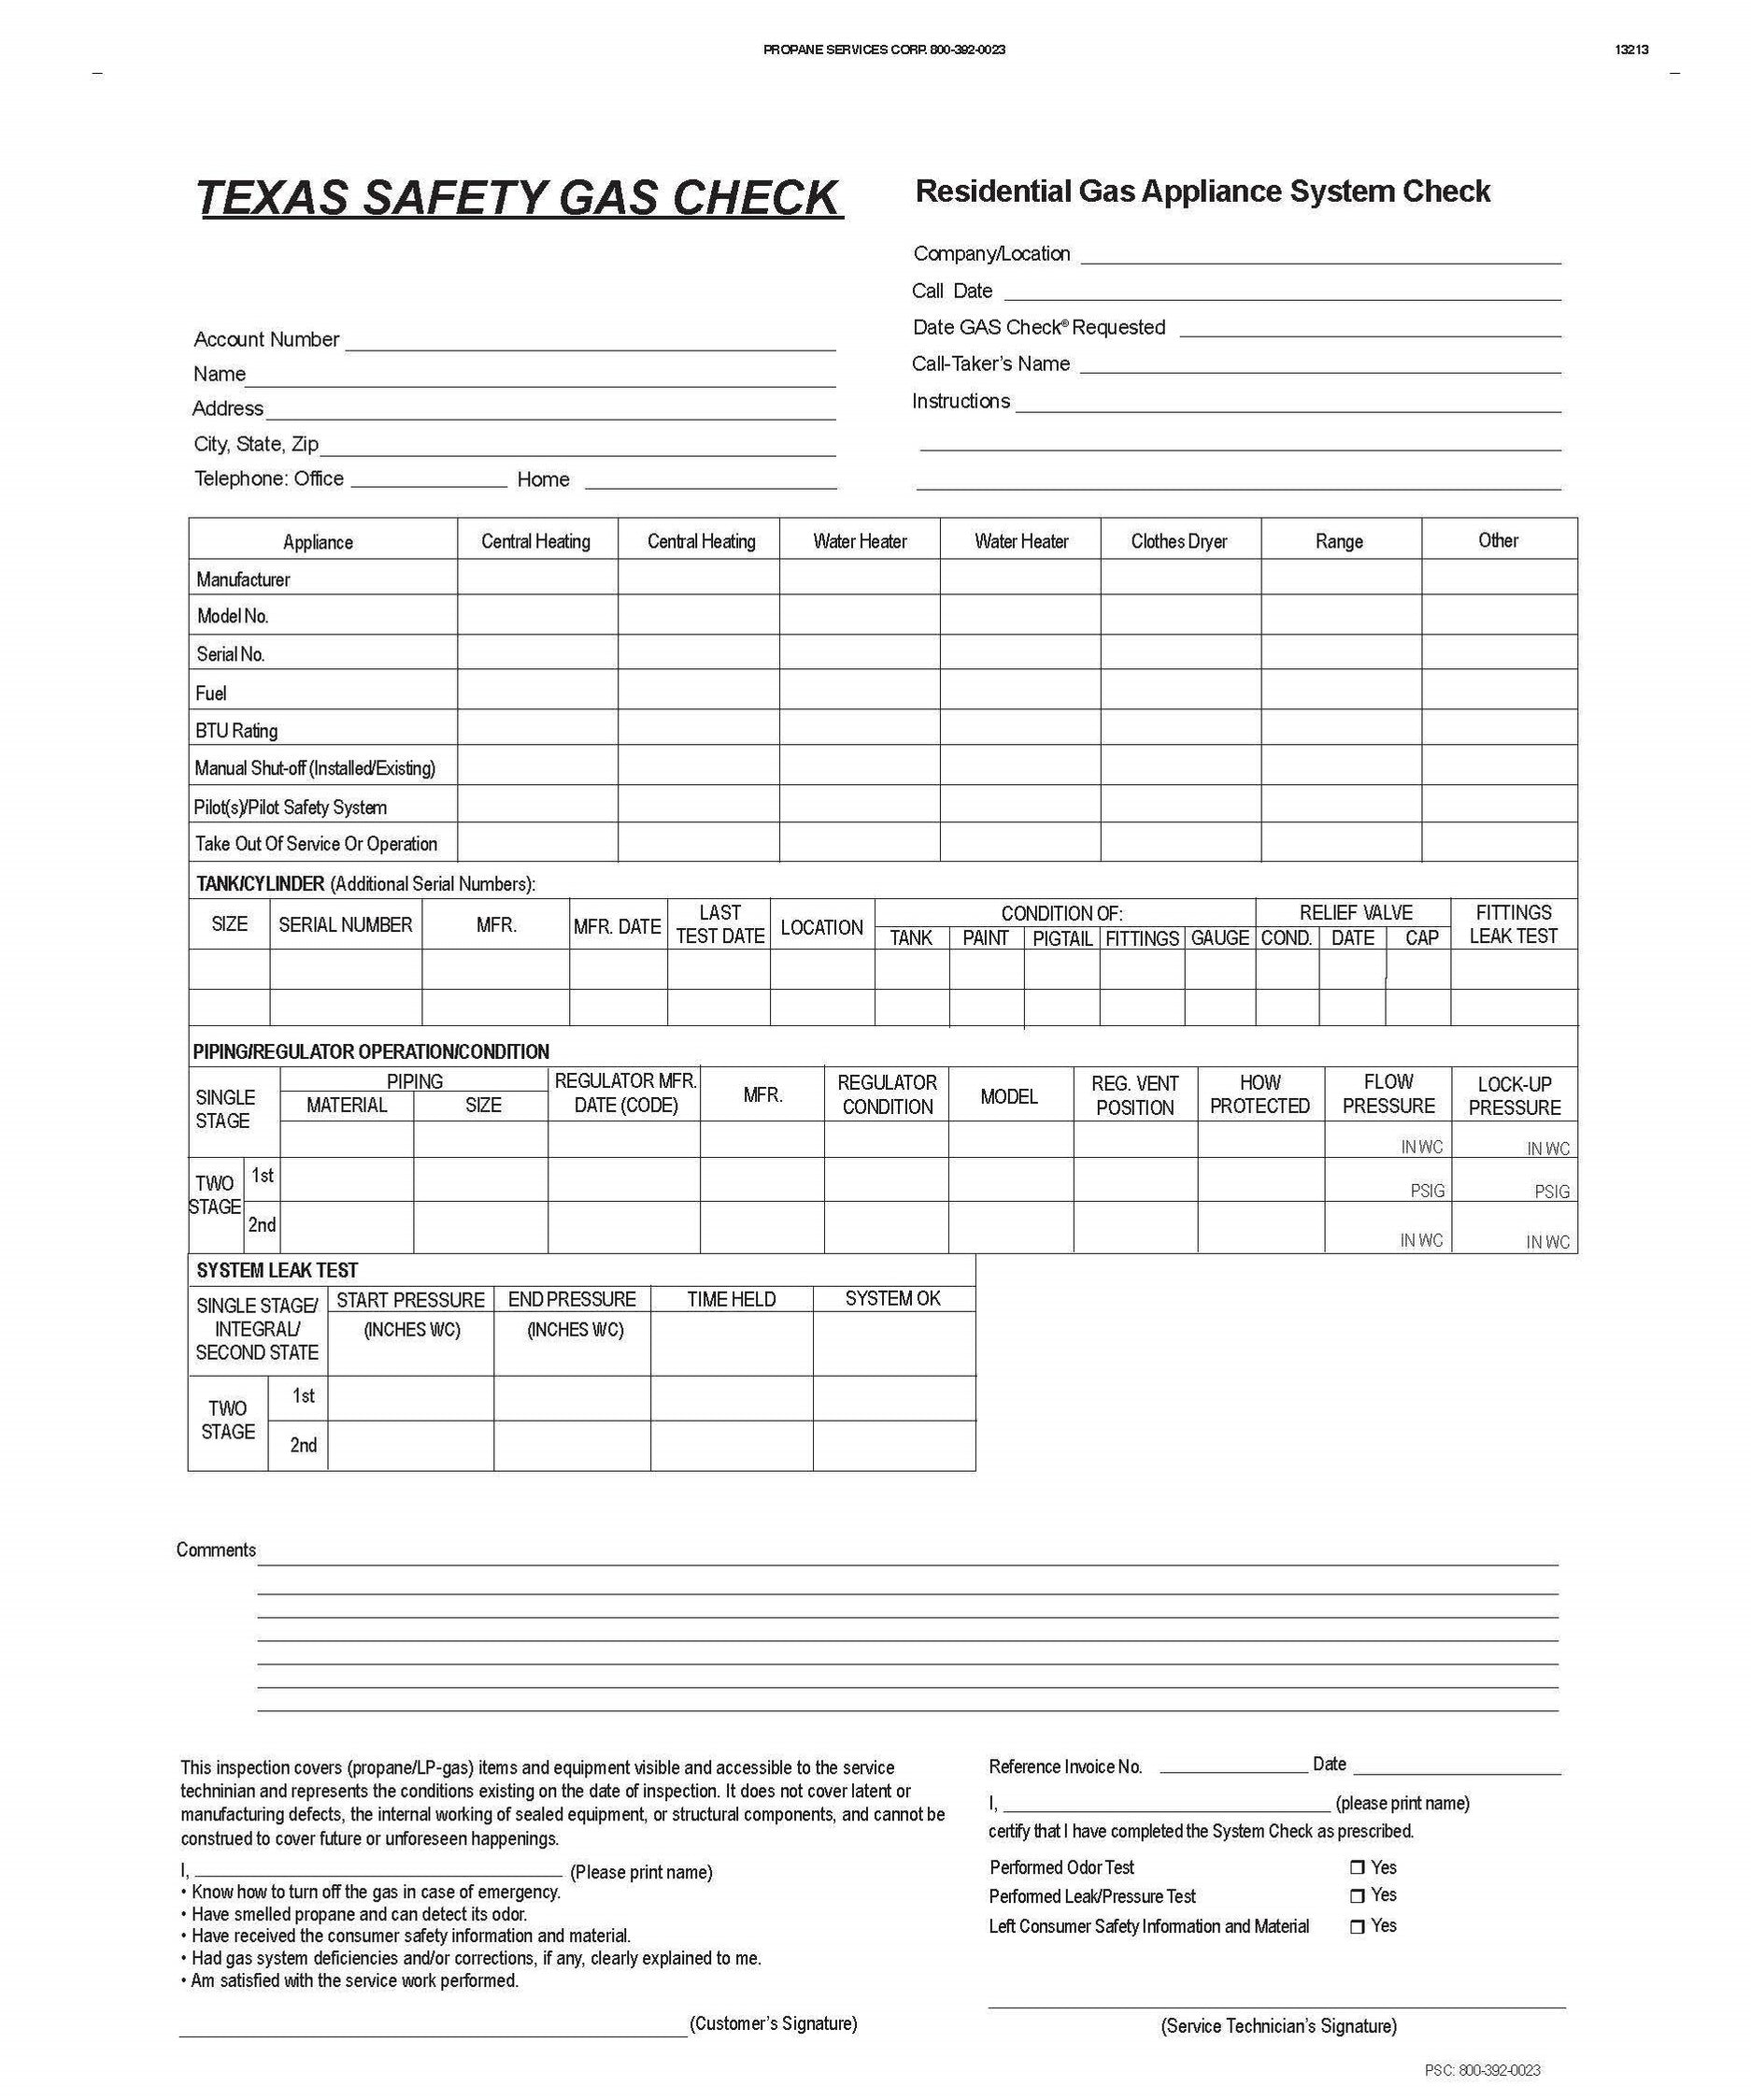 Texas Safety Gas Check Forms — PSC